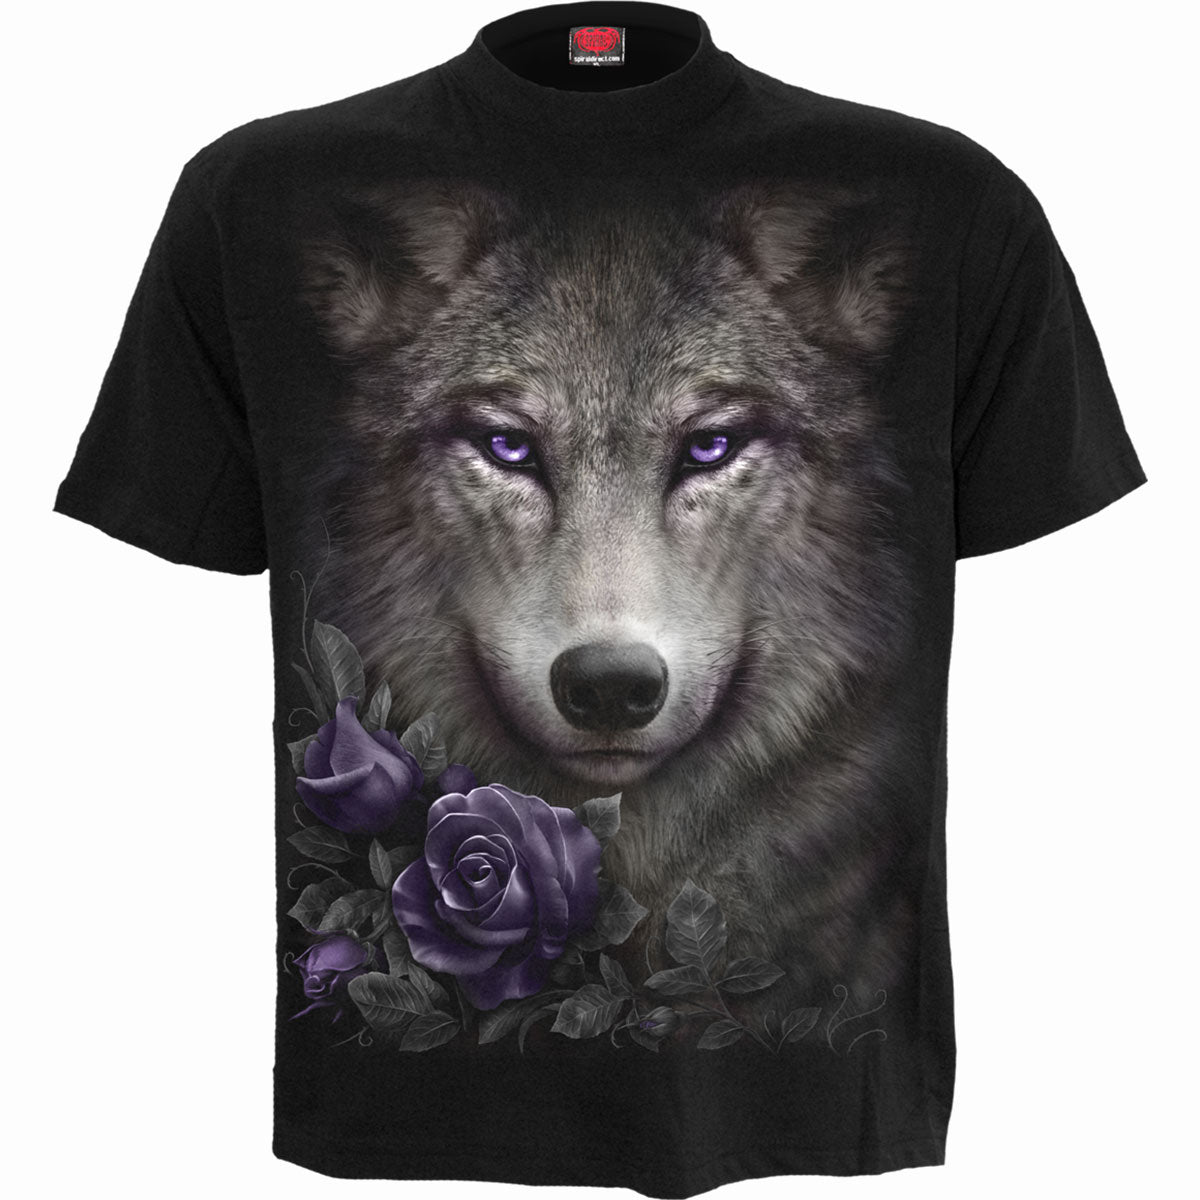 WOLF ROSES - Front Print T-Shirt Black